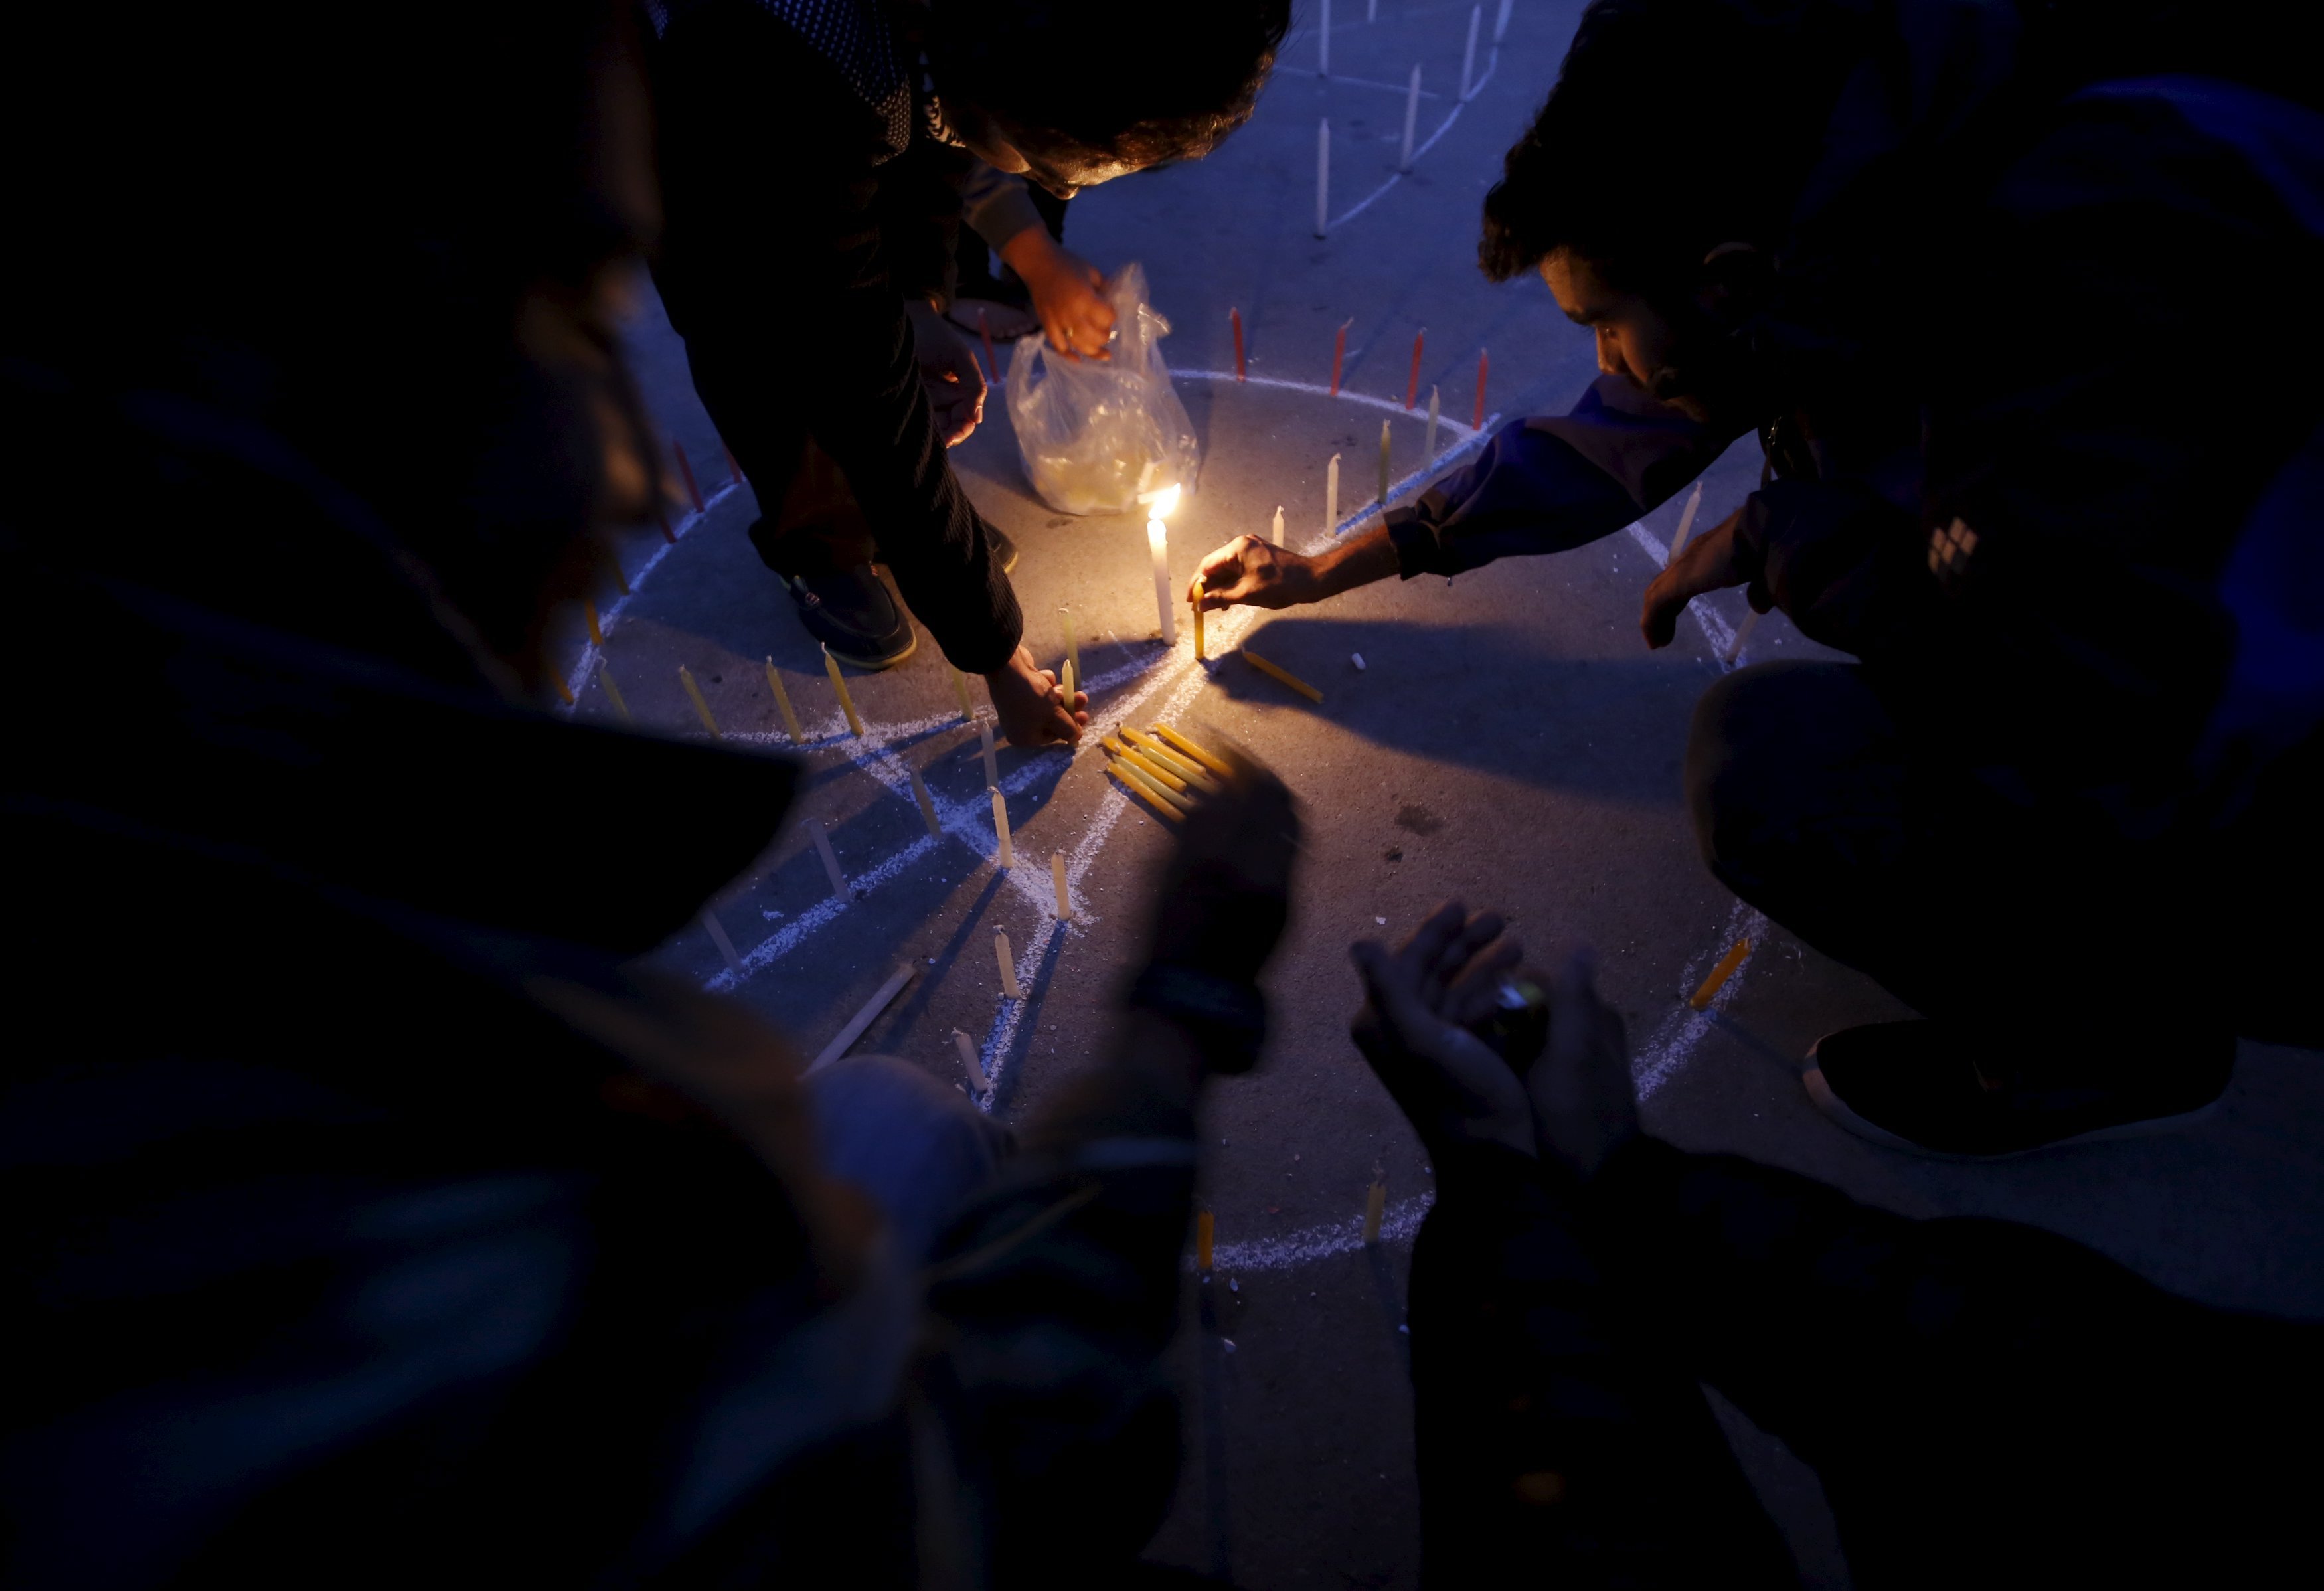 People light candles during a vigil in Kathmandu following the deadly attacks in Paris, on Nov. 15, 2015.